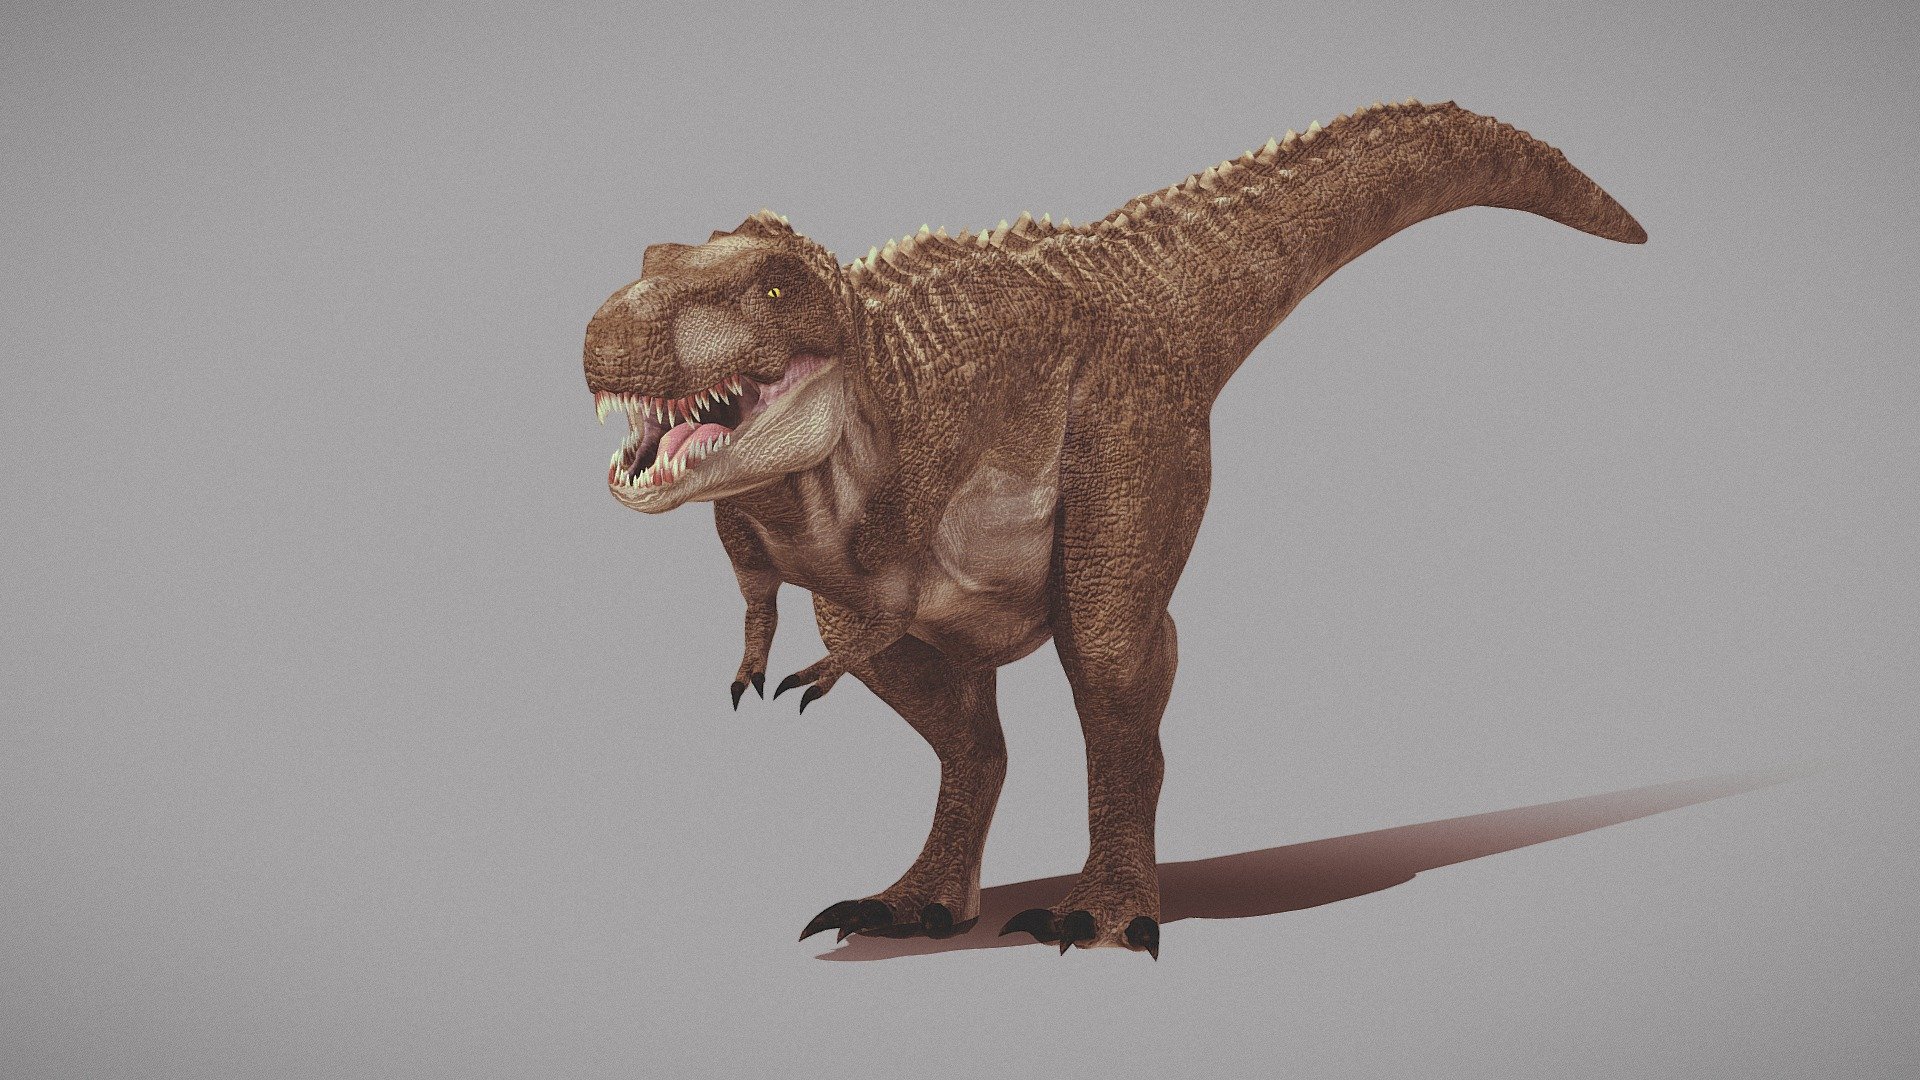 T-rex asset created for university, part of a diorama 3d model